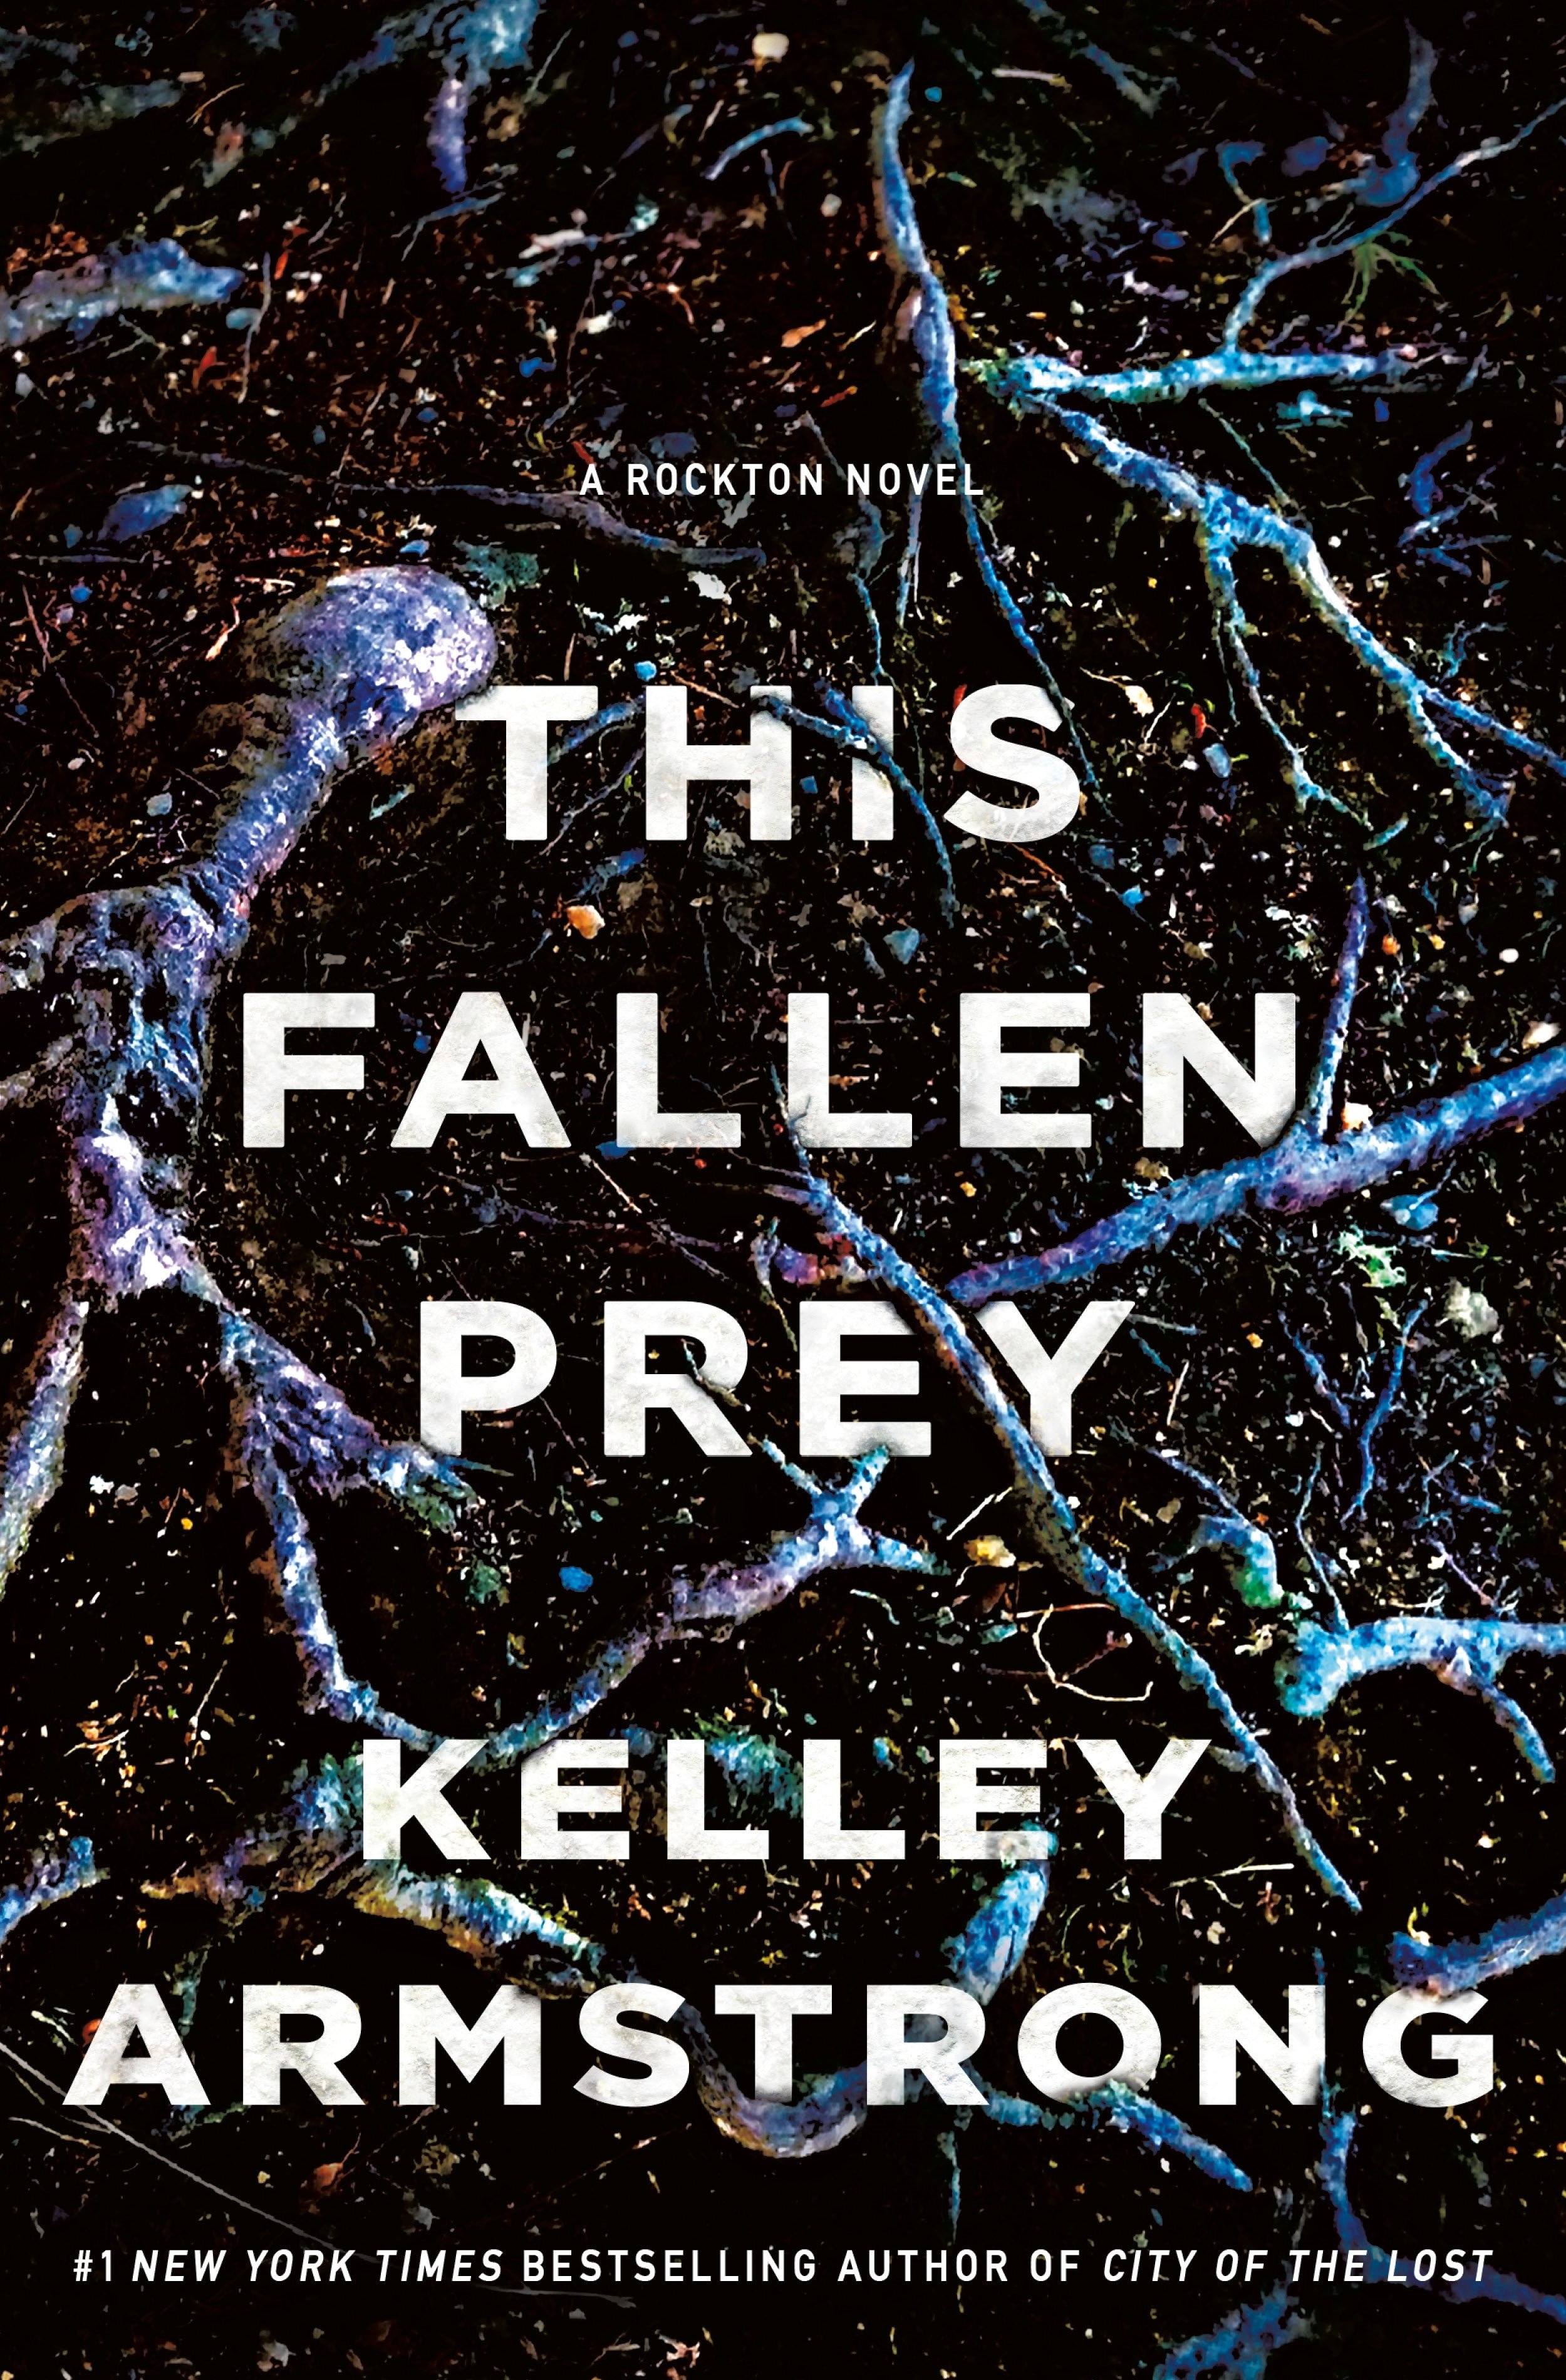 Book “This Fallen Prey” by Kelley Armstrong